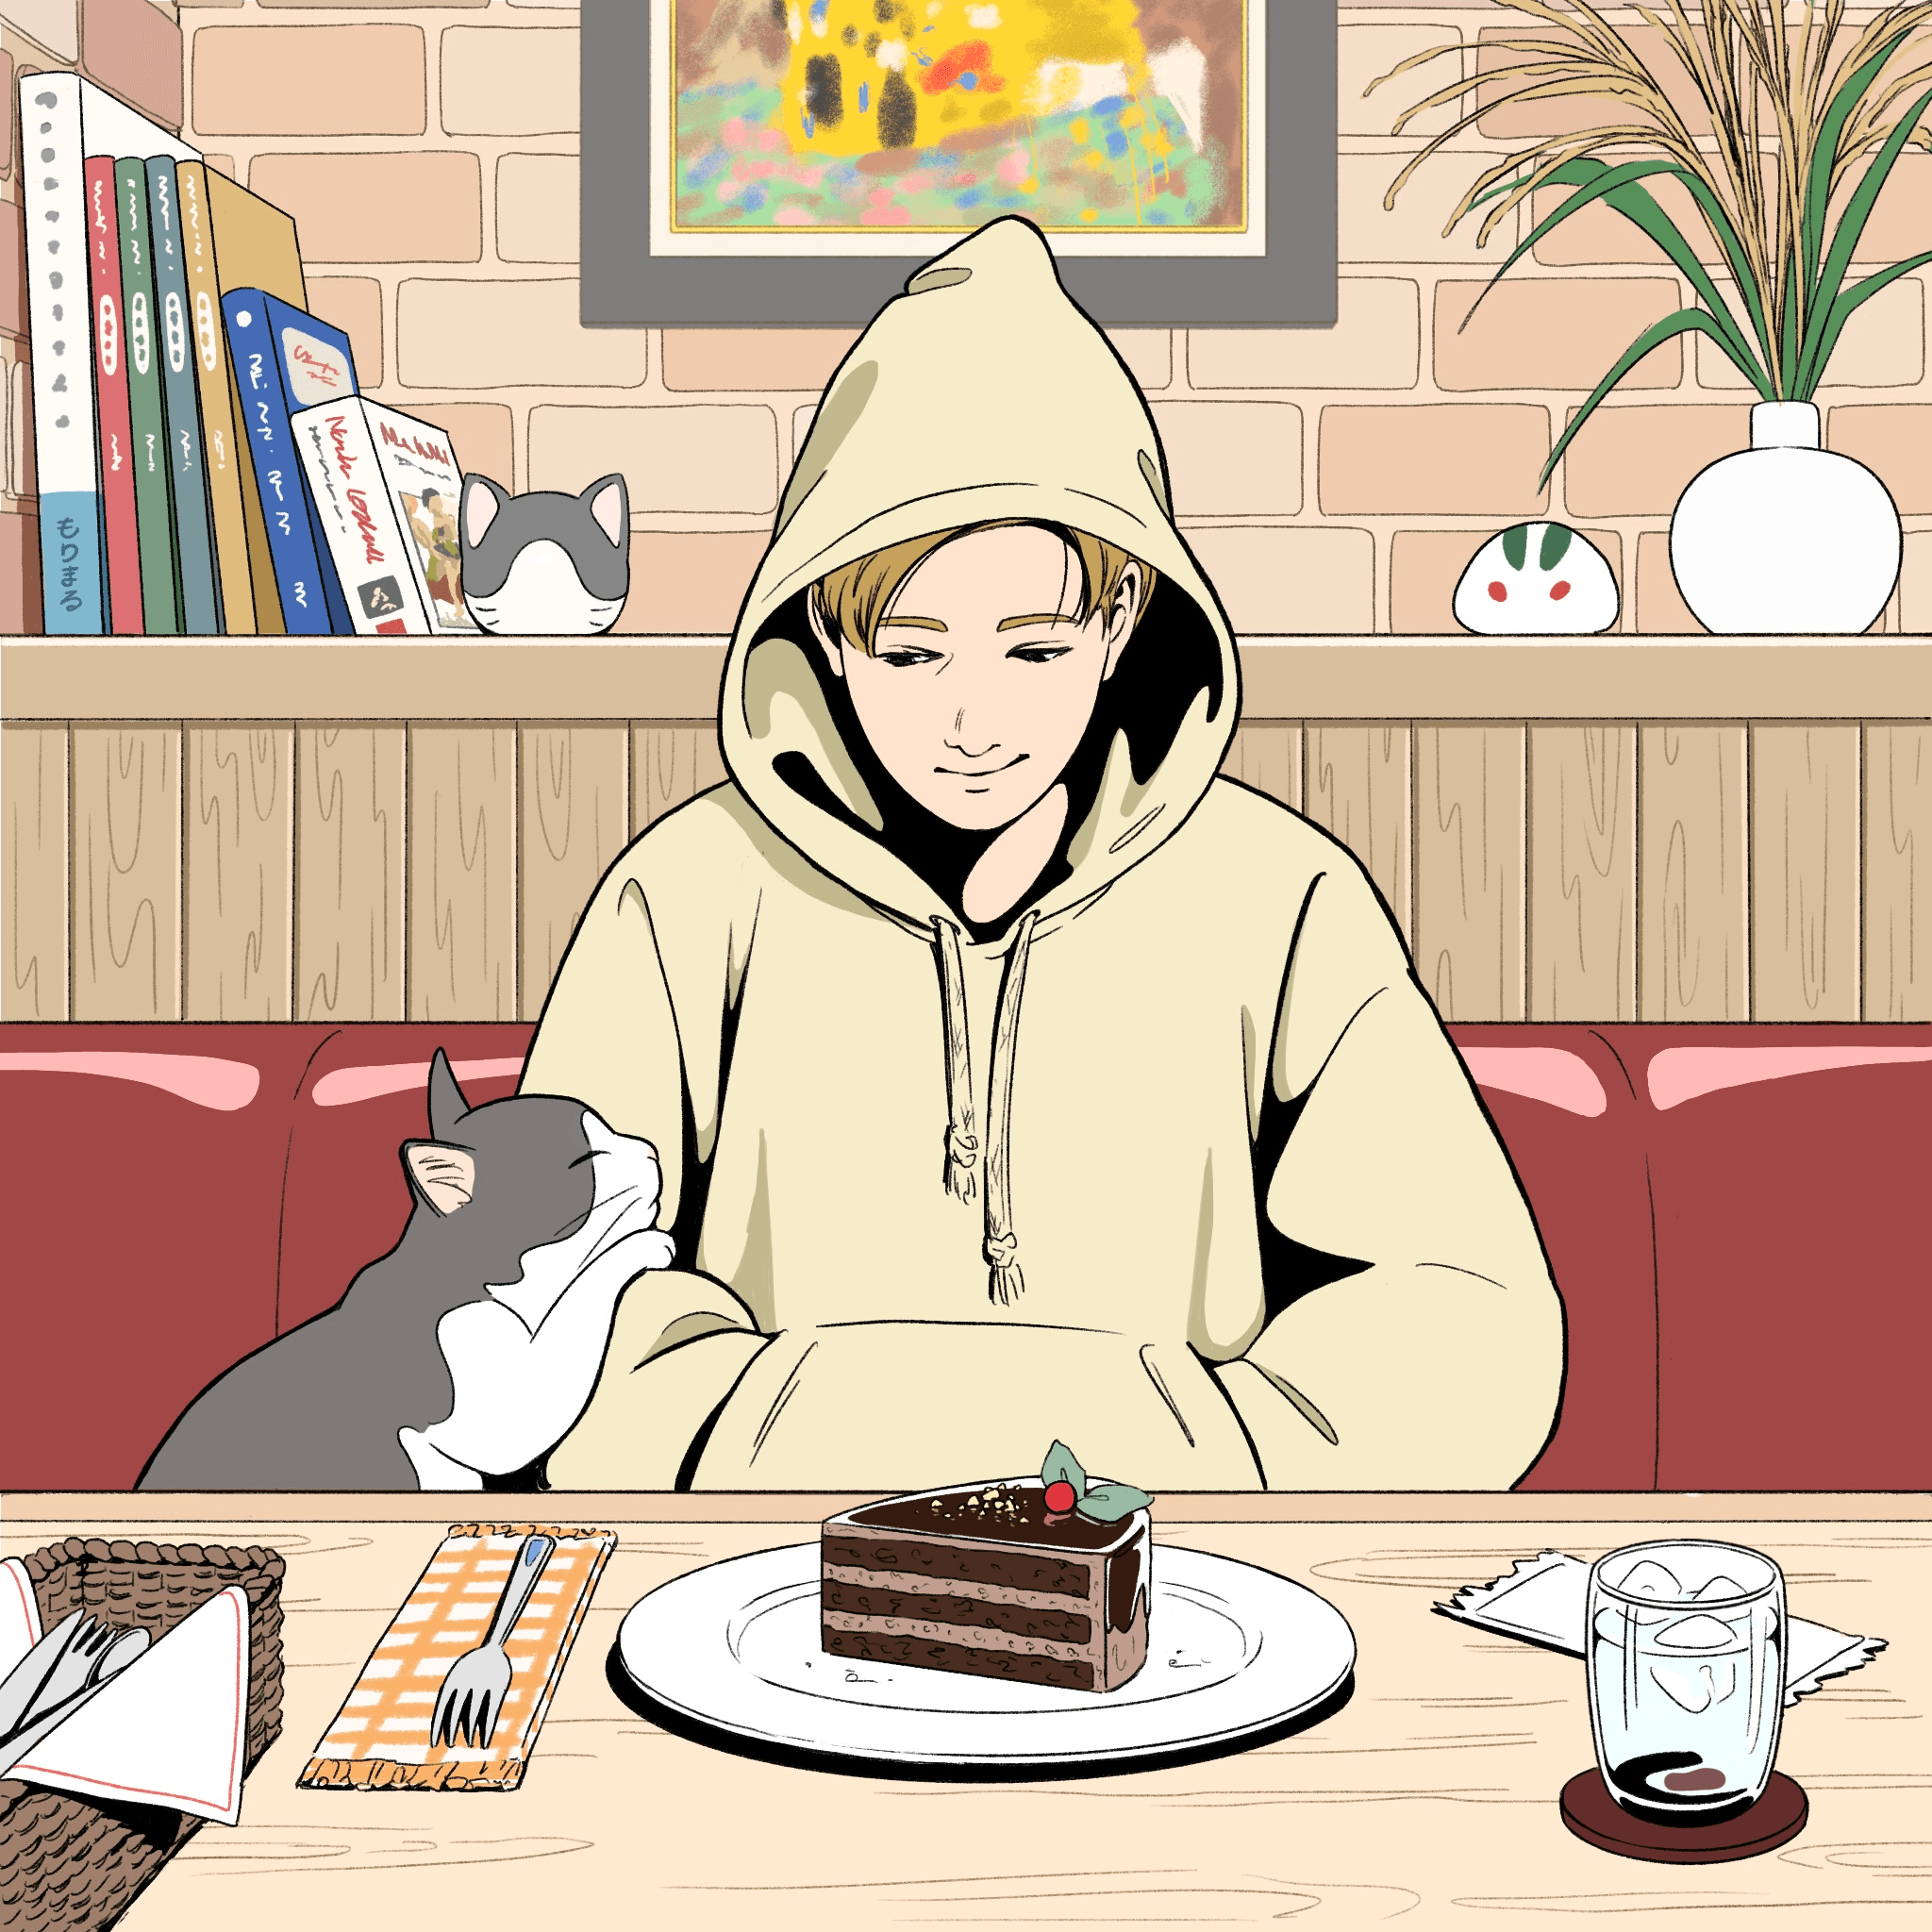 Chocolate cake, he's well liked by the cat